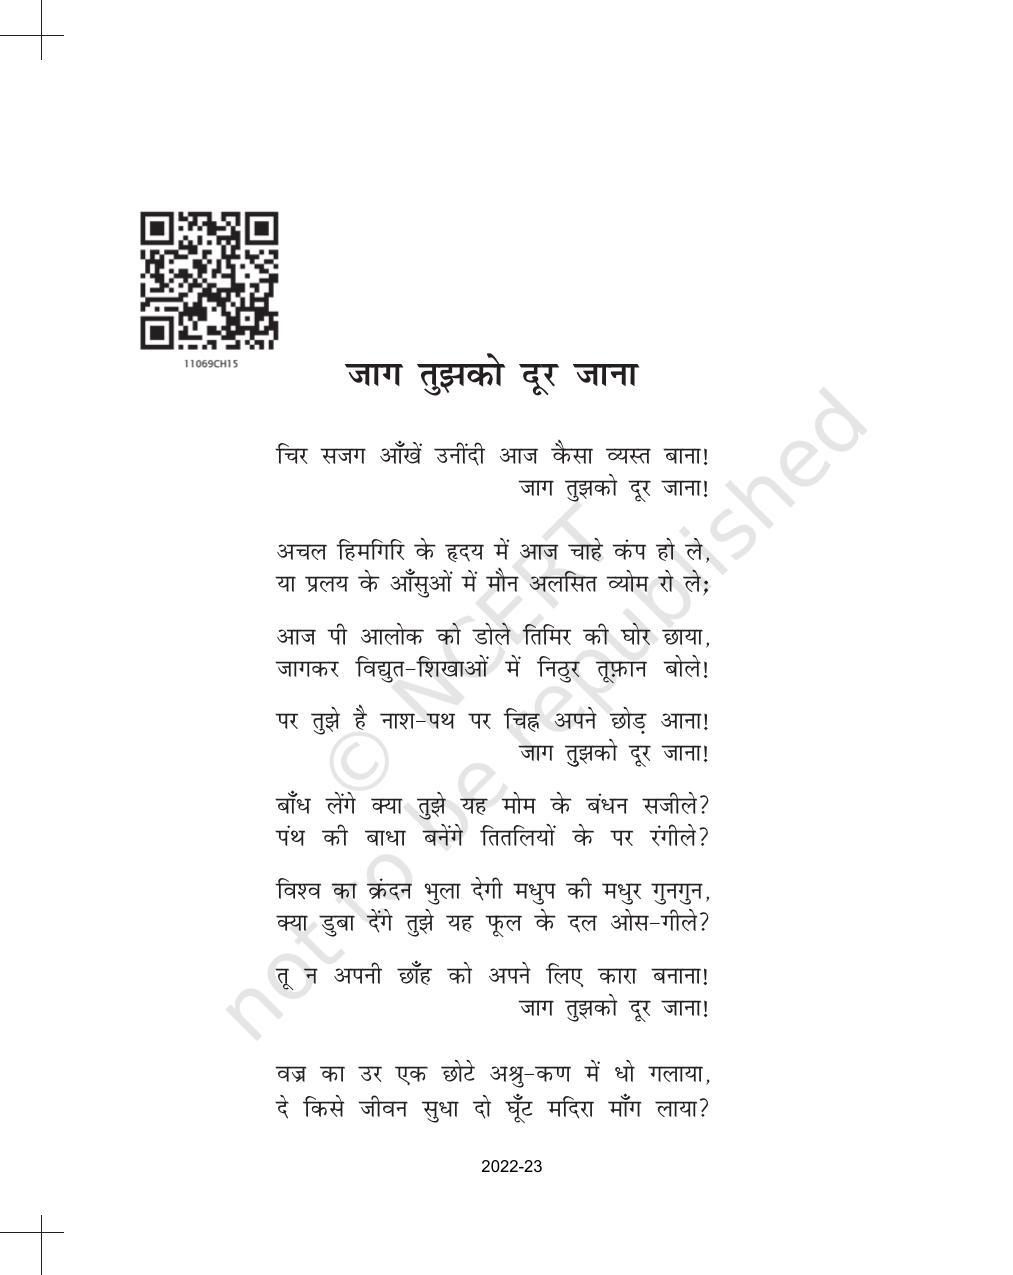 NCERT Book for Class 11 Hindi Antra Chapter 15 महादेवी वर्मा - Page 3